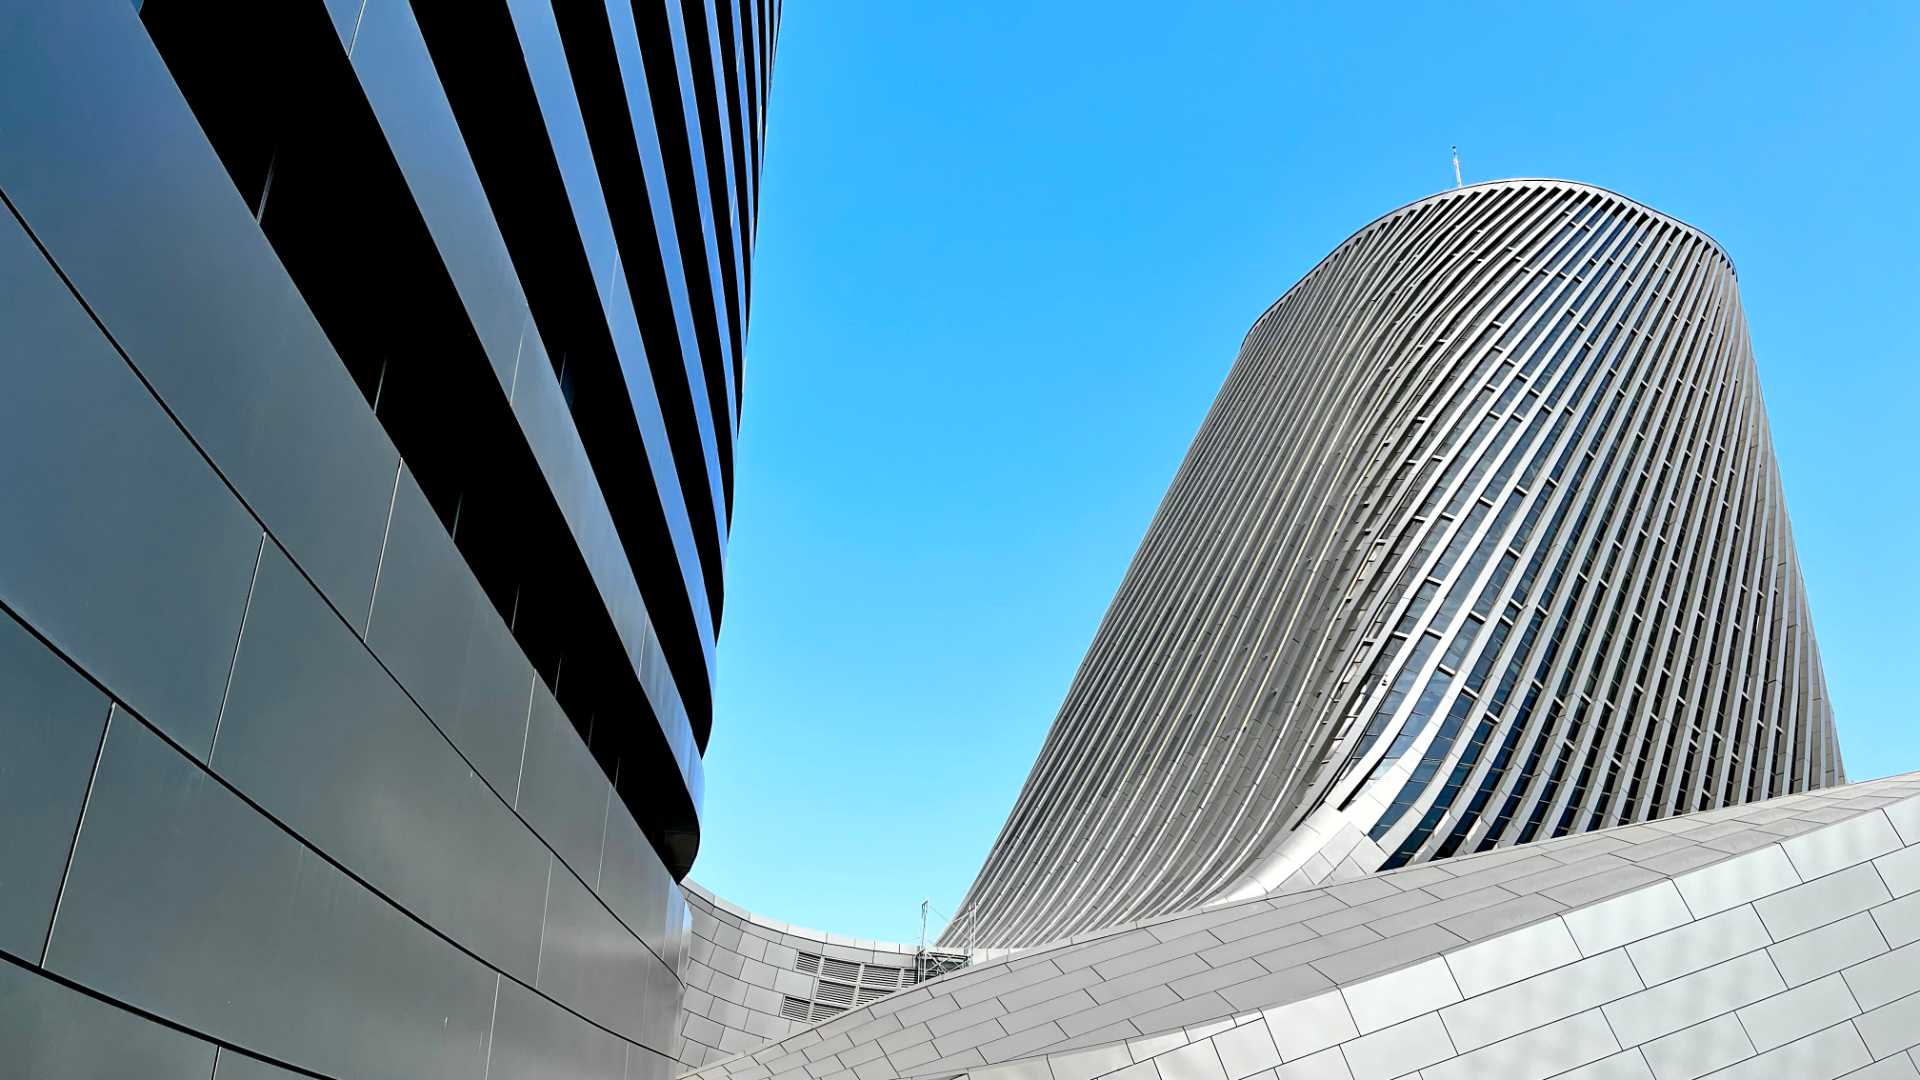 Abstract view of the curved metal and glass tower section of Kaohsiung Port Cruise Terminal.